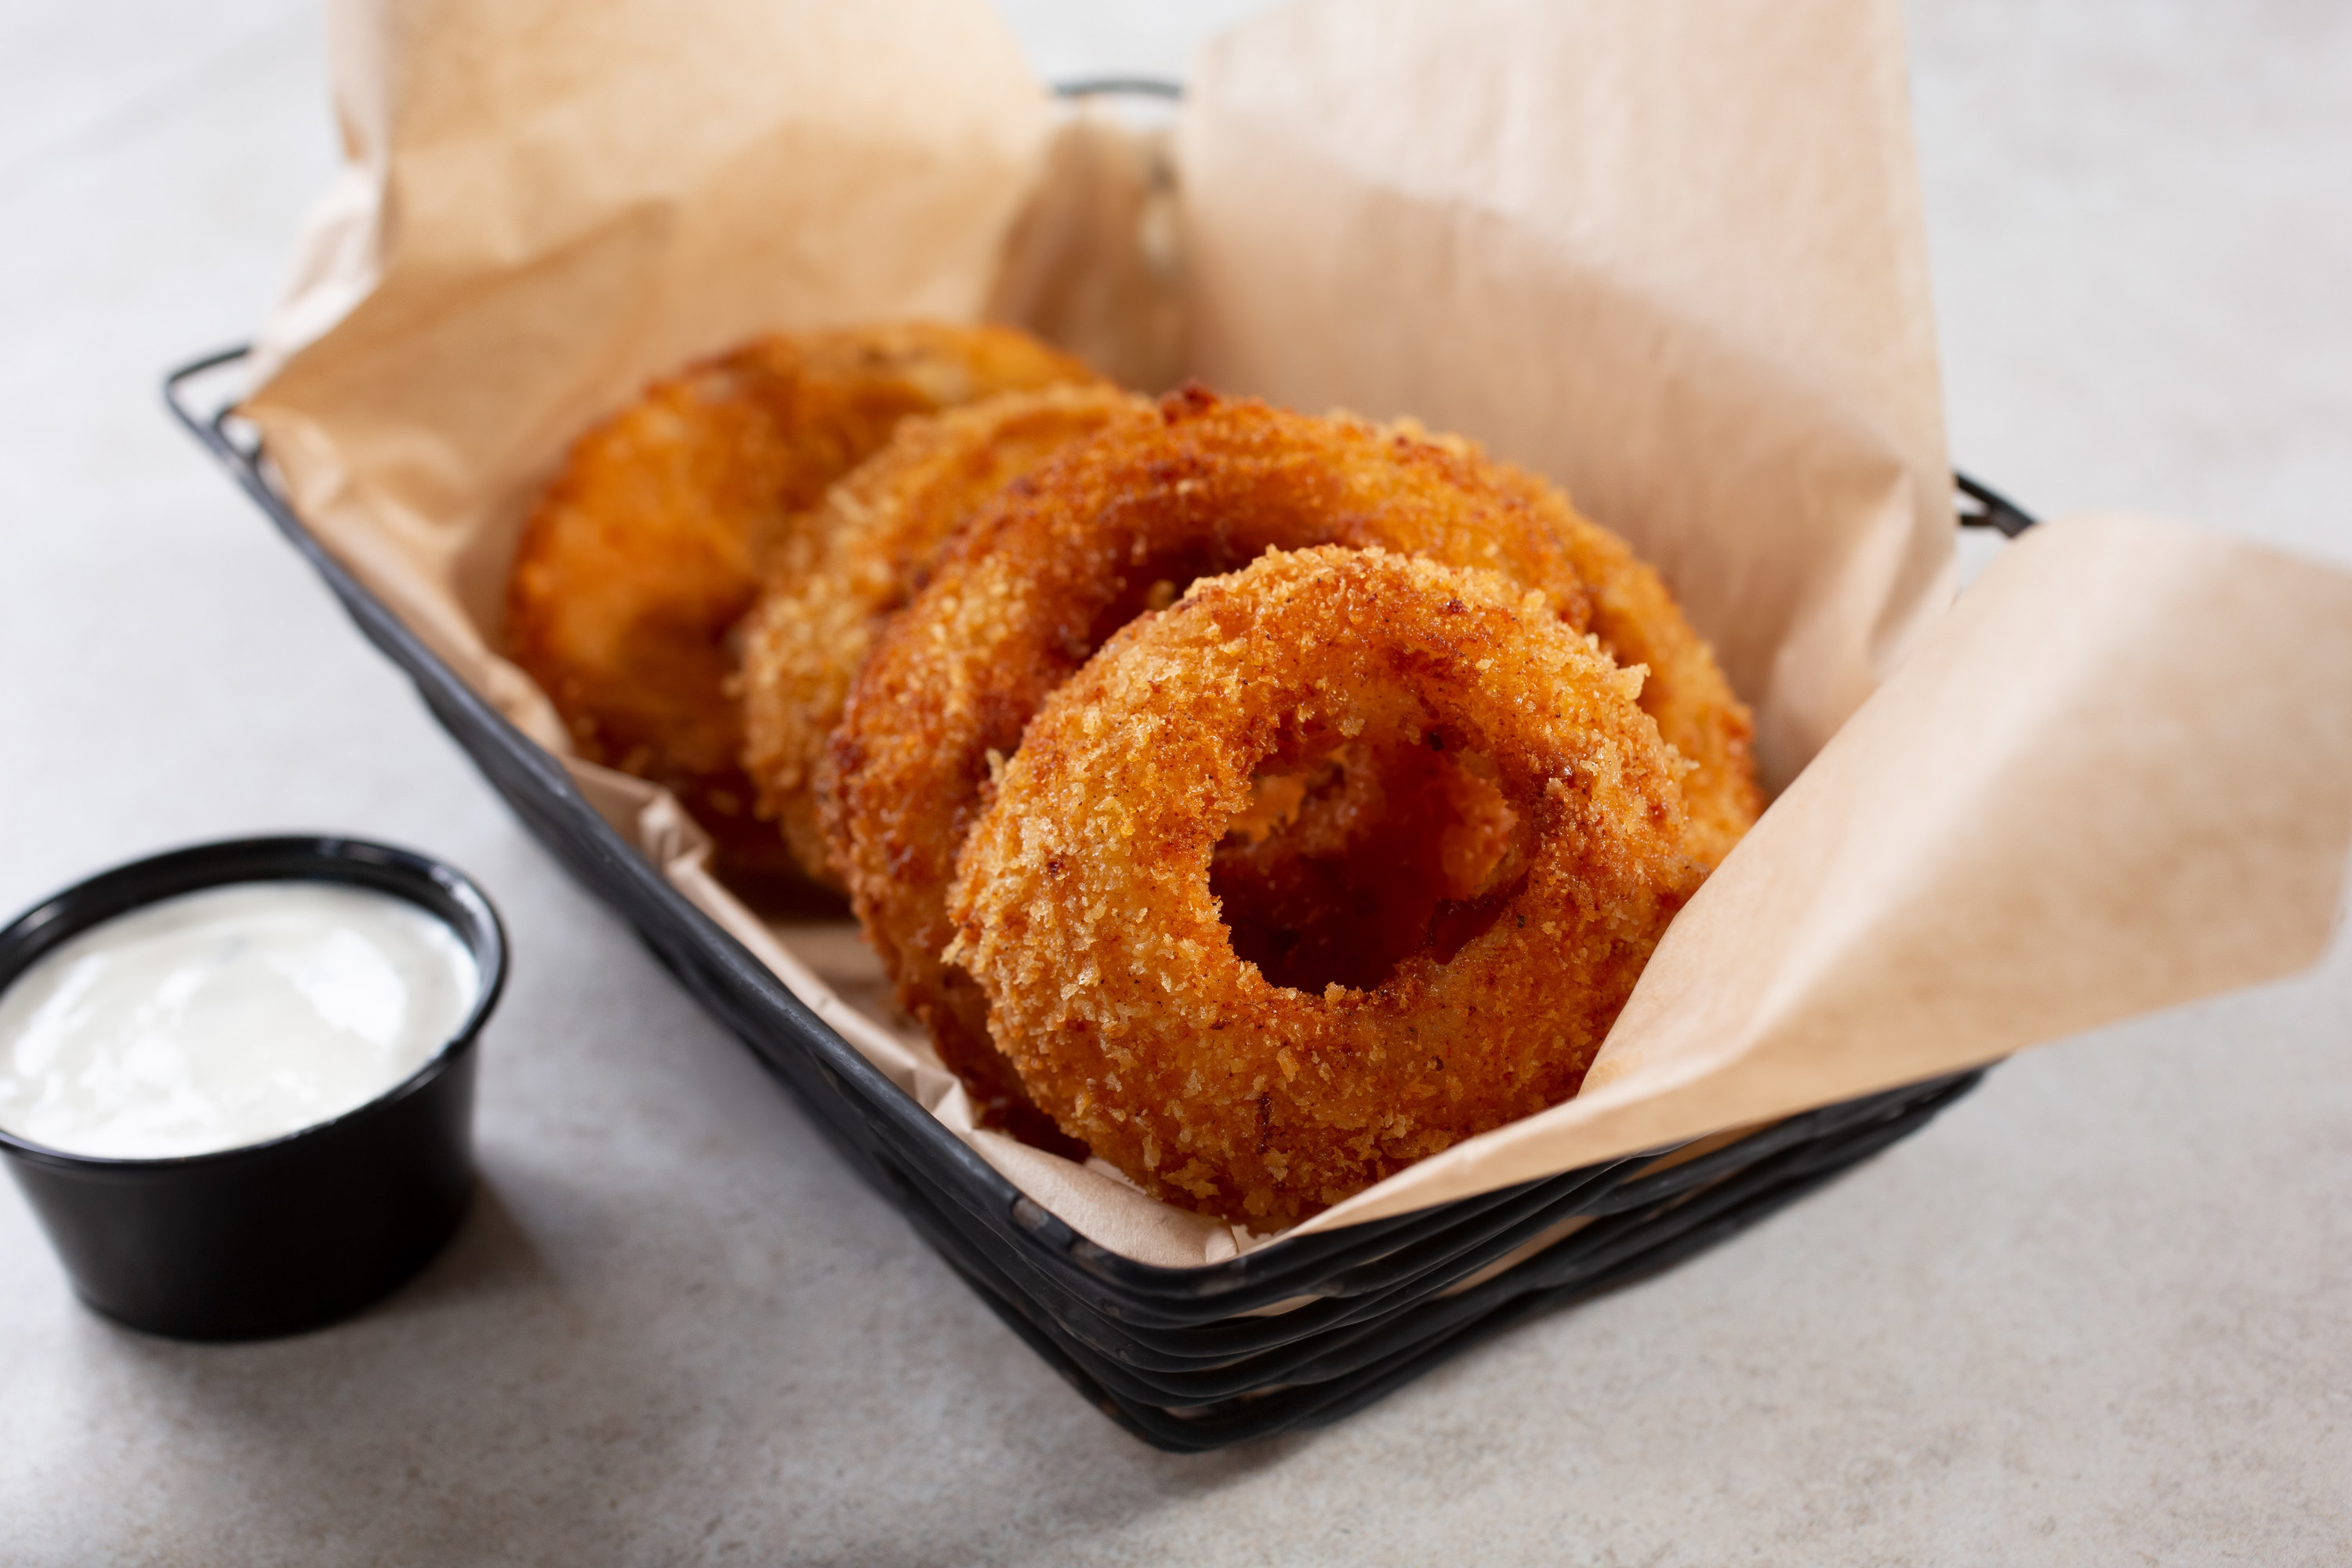 Ranch and onion rings